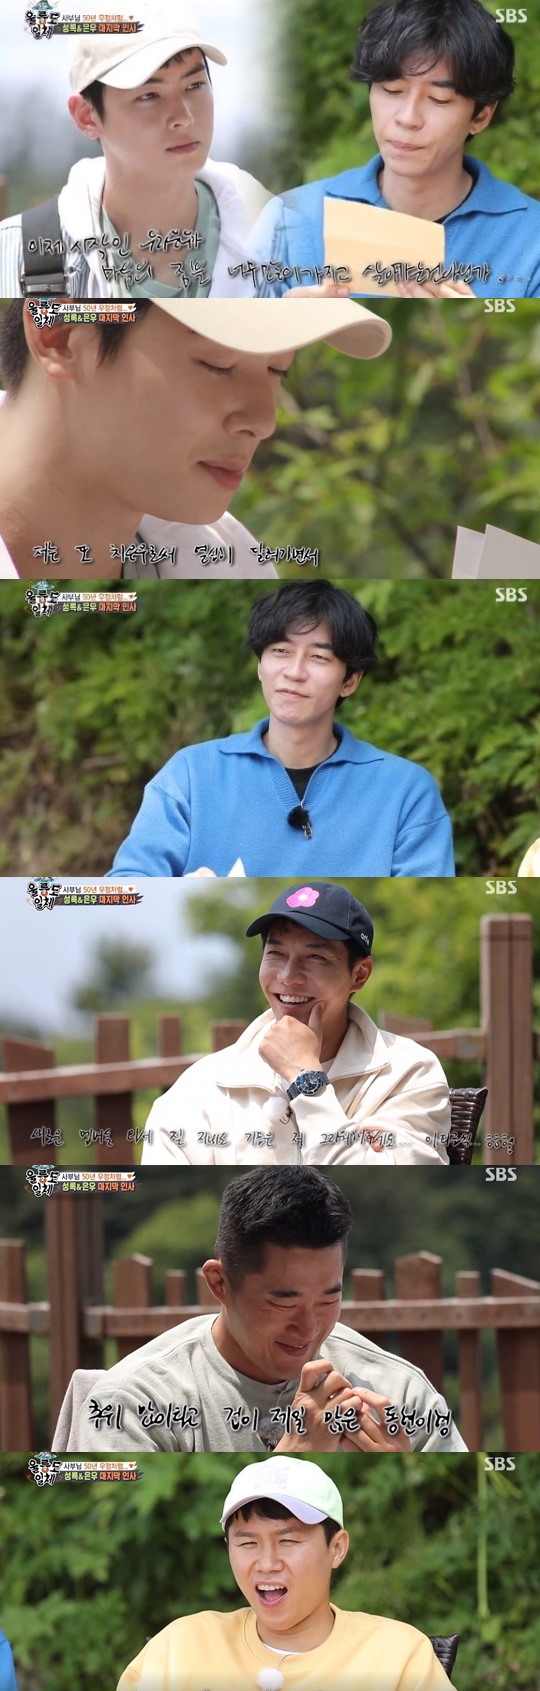 In the SBS entertainment program All The Butlers, which aired on the 20th, the last trip of five members with Master Yi Jang-hui was drawn in Ulleungdo.Yi Jang-hui, who celebrated his 50th anniversary on the day, was congratulated by his best friend Song Chang-sik and Cho Young-nam.When the members envied their friendship, Yi Jang-hui told Shin Sung-rok and Cha Eun-woo, You two are the last ones today?I think its the greatest success in life, good friend, he said.Shin Sung-rok spent his last night with the members and said, It was good to meet the masters, but it was good to contact us when we did not work together with you.Cha Eun-woo also said, I went to Knowing Brother a while ago, and the crew told me that my brothers smelled.I thought I would go to see my brothers every time rather than going to shoot. The following day the members made memories by kayaking with Shin Sung-rok and Cha Eun-woo.Lee Seung-gi told Shin Sung-rok, If you choose the best brother, you were your brother.I was comfortable with being with you, and Shin Sung-rok said, I was just comfortable with you, and I was very willing to be your brother. Cha Eun-woo also read his own handwritten letter and said, I was happy and happy for the time together.I have learned a lot from meeting other masters every week, but I think I have learned more from my brothers.  Even if new members come and do well, sometimes miss me.I like to be praised, I like to choose a menu, I like to choose a menu, I am cold and I am afraid, I am a scared Donghyun,Everyone loves so much, he said.Earlier, All The Butlers said Shin Sung-rok and Cha Eun-woo will leave the program after the broadcast.The reason why they get off is to concentrate on their main business.I am deeply grateful to the two brothers Shin Sung-rok and Cha Eun-woo who have always given me a pleasant smile, said All The Butlers.I will always support you.The successor to the two who got off has not yet been decided, and attention is focused on who will join the new member and show off his breathing with the existing members.photolSBS